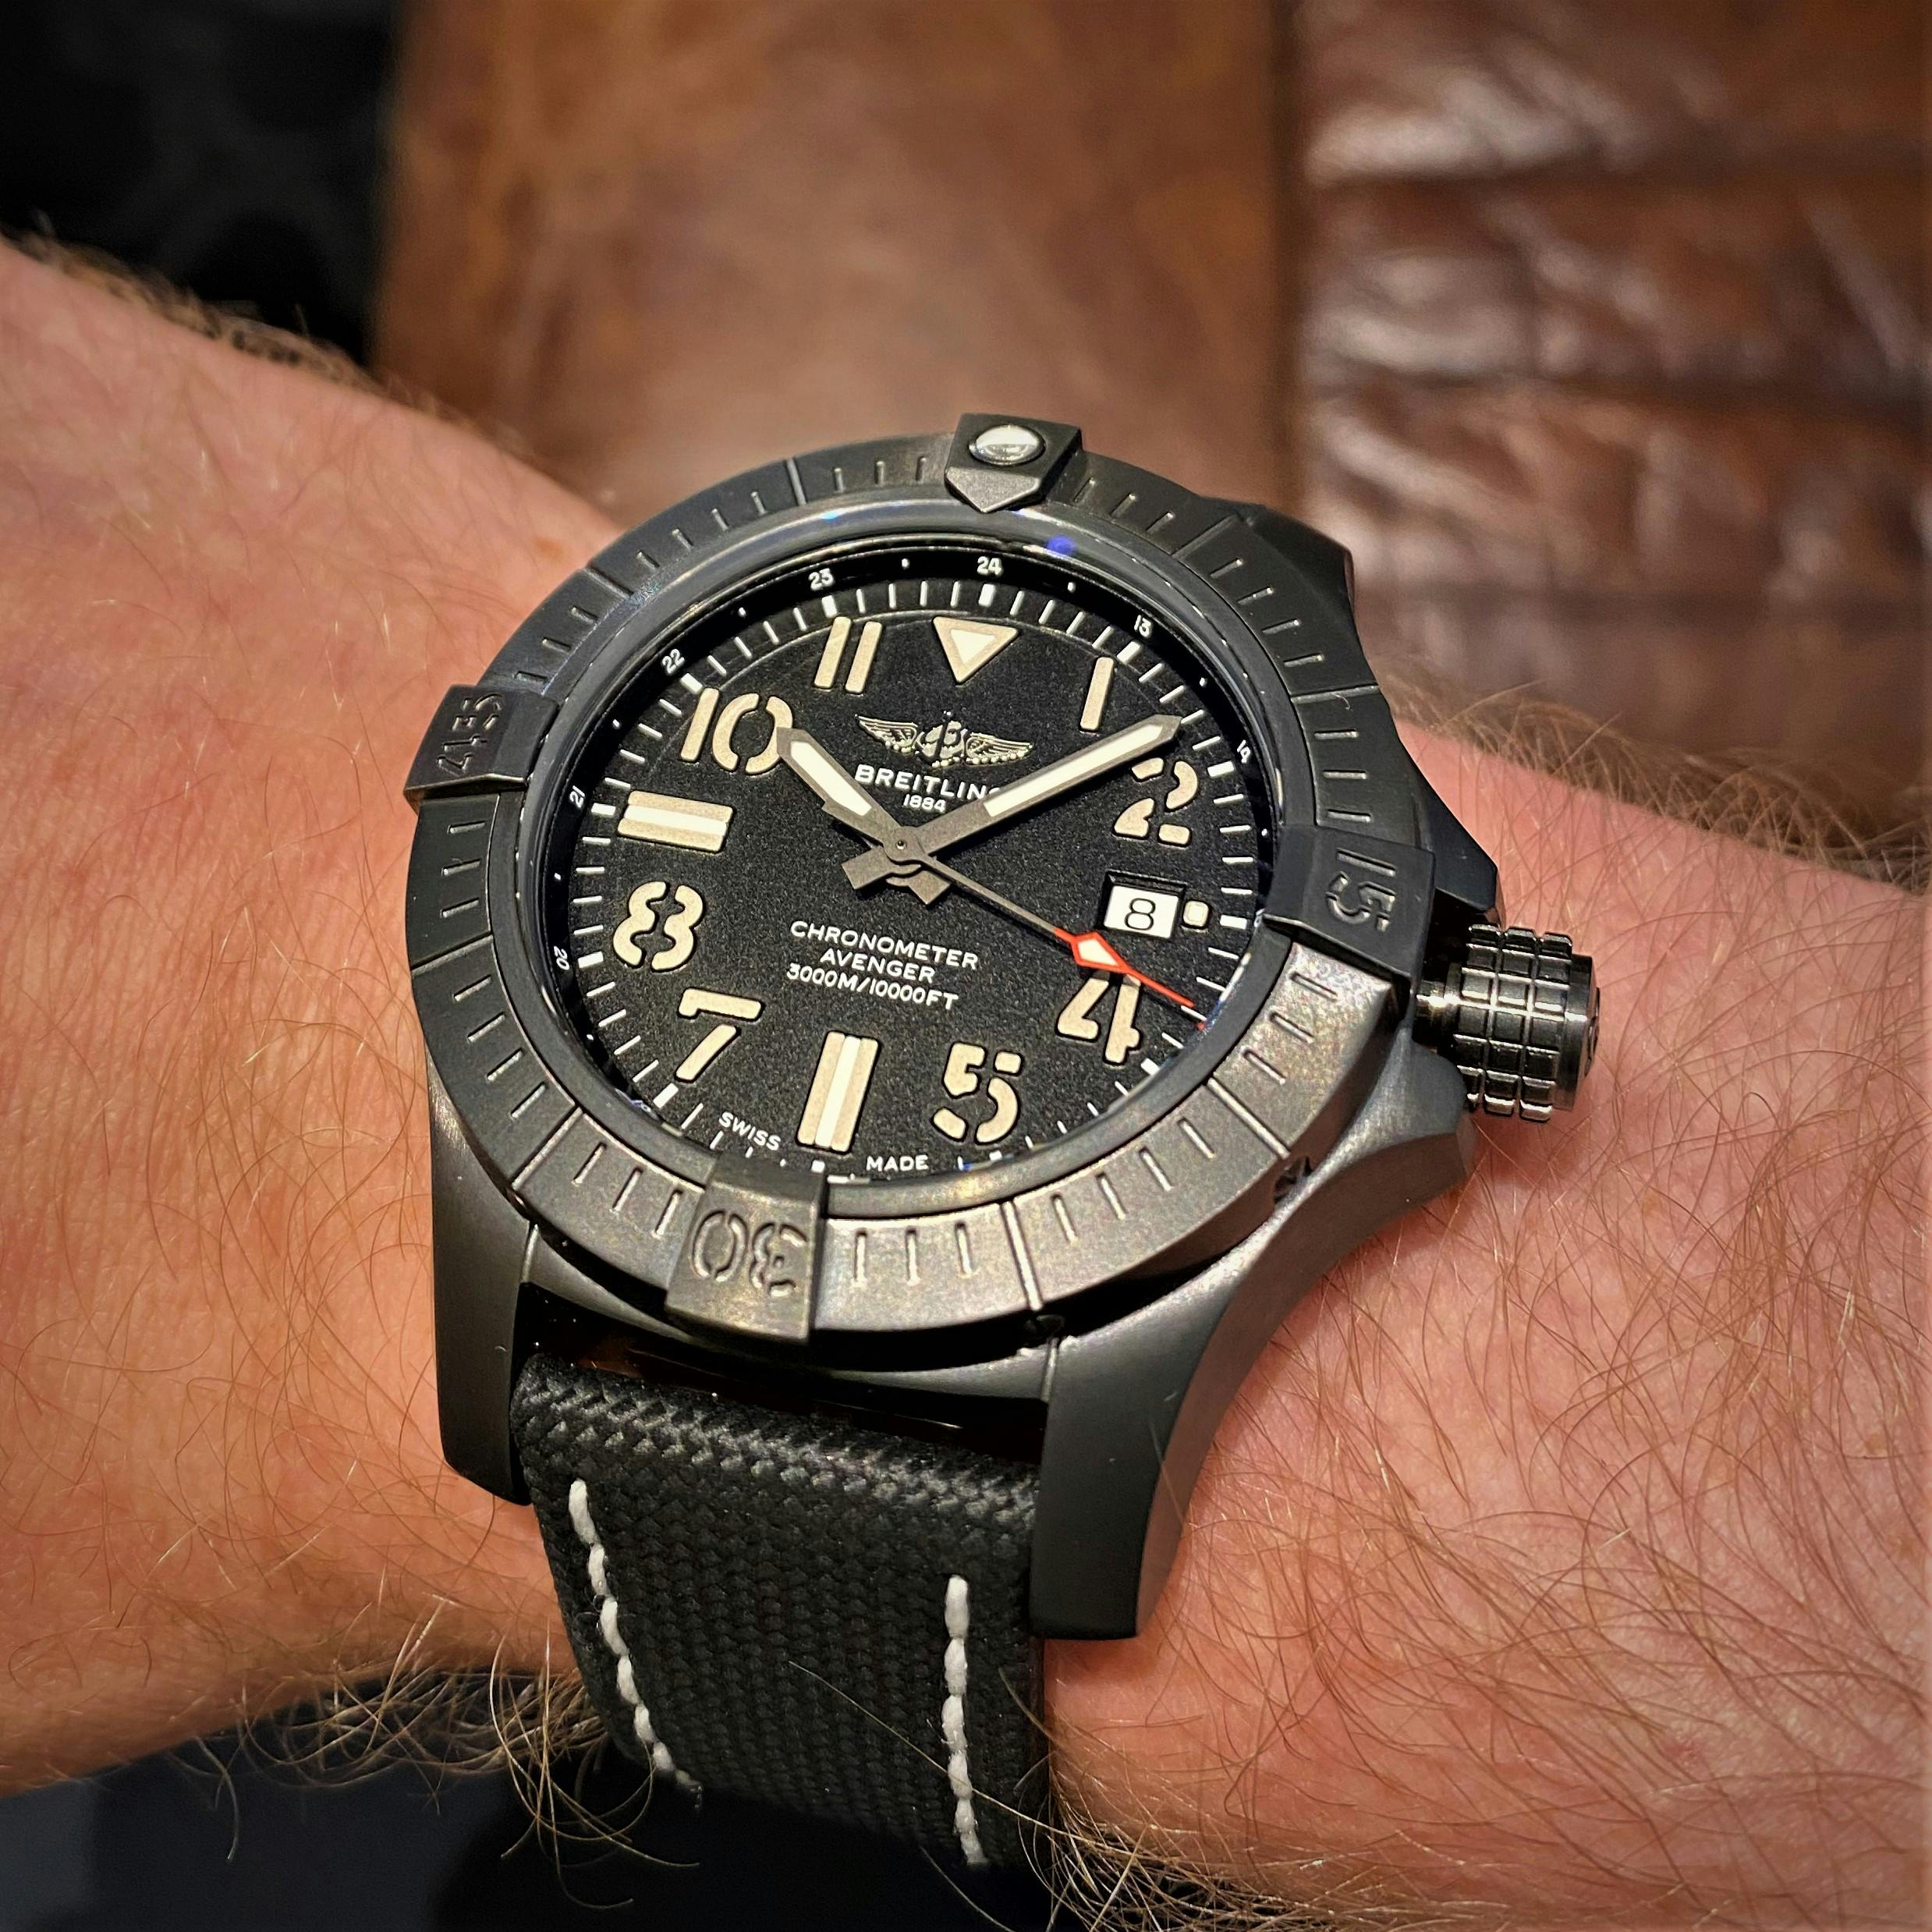 A Breitling Avenger, a small but tough range of watches that have always been popular with adventurous Breitling fans.